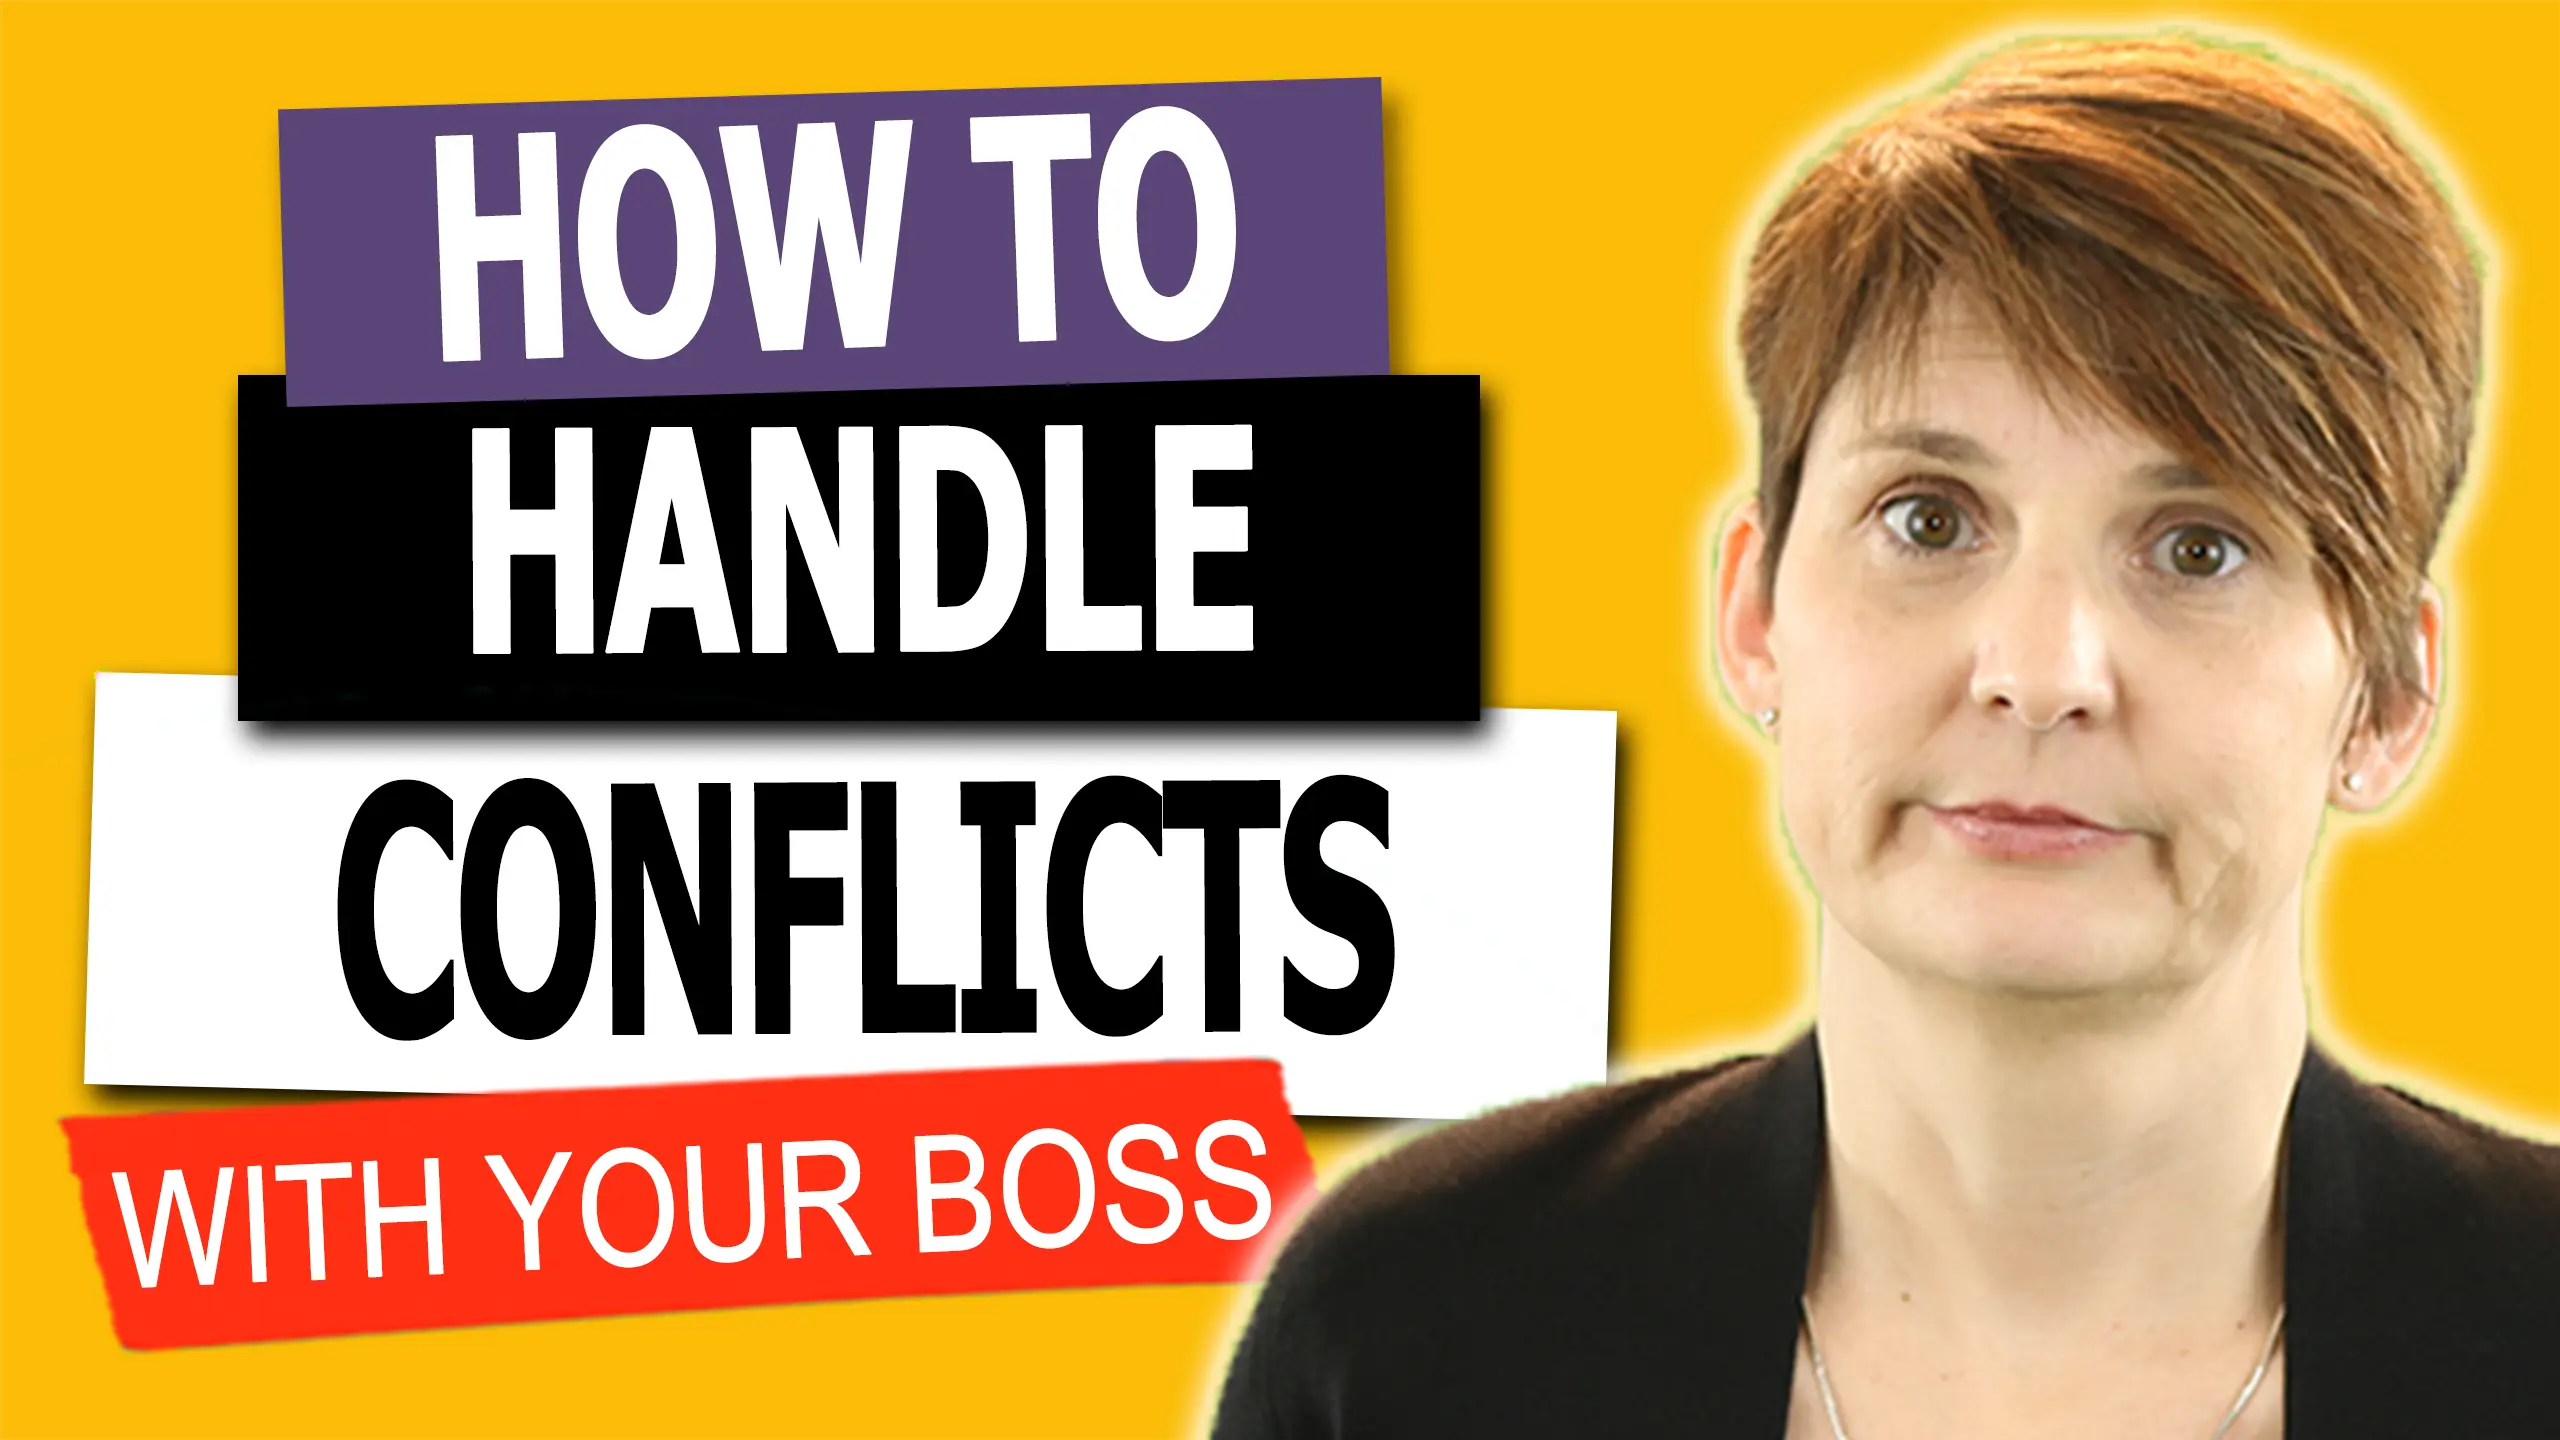 How to Handle Conflicts with Your Boss with Liane Davey